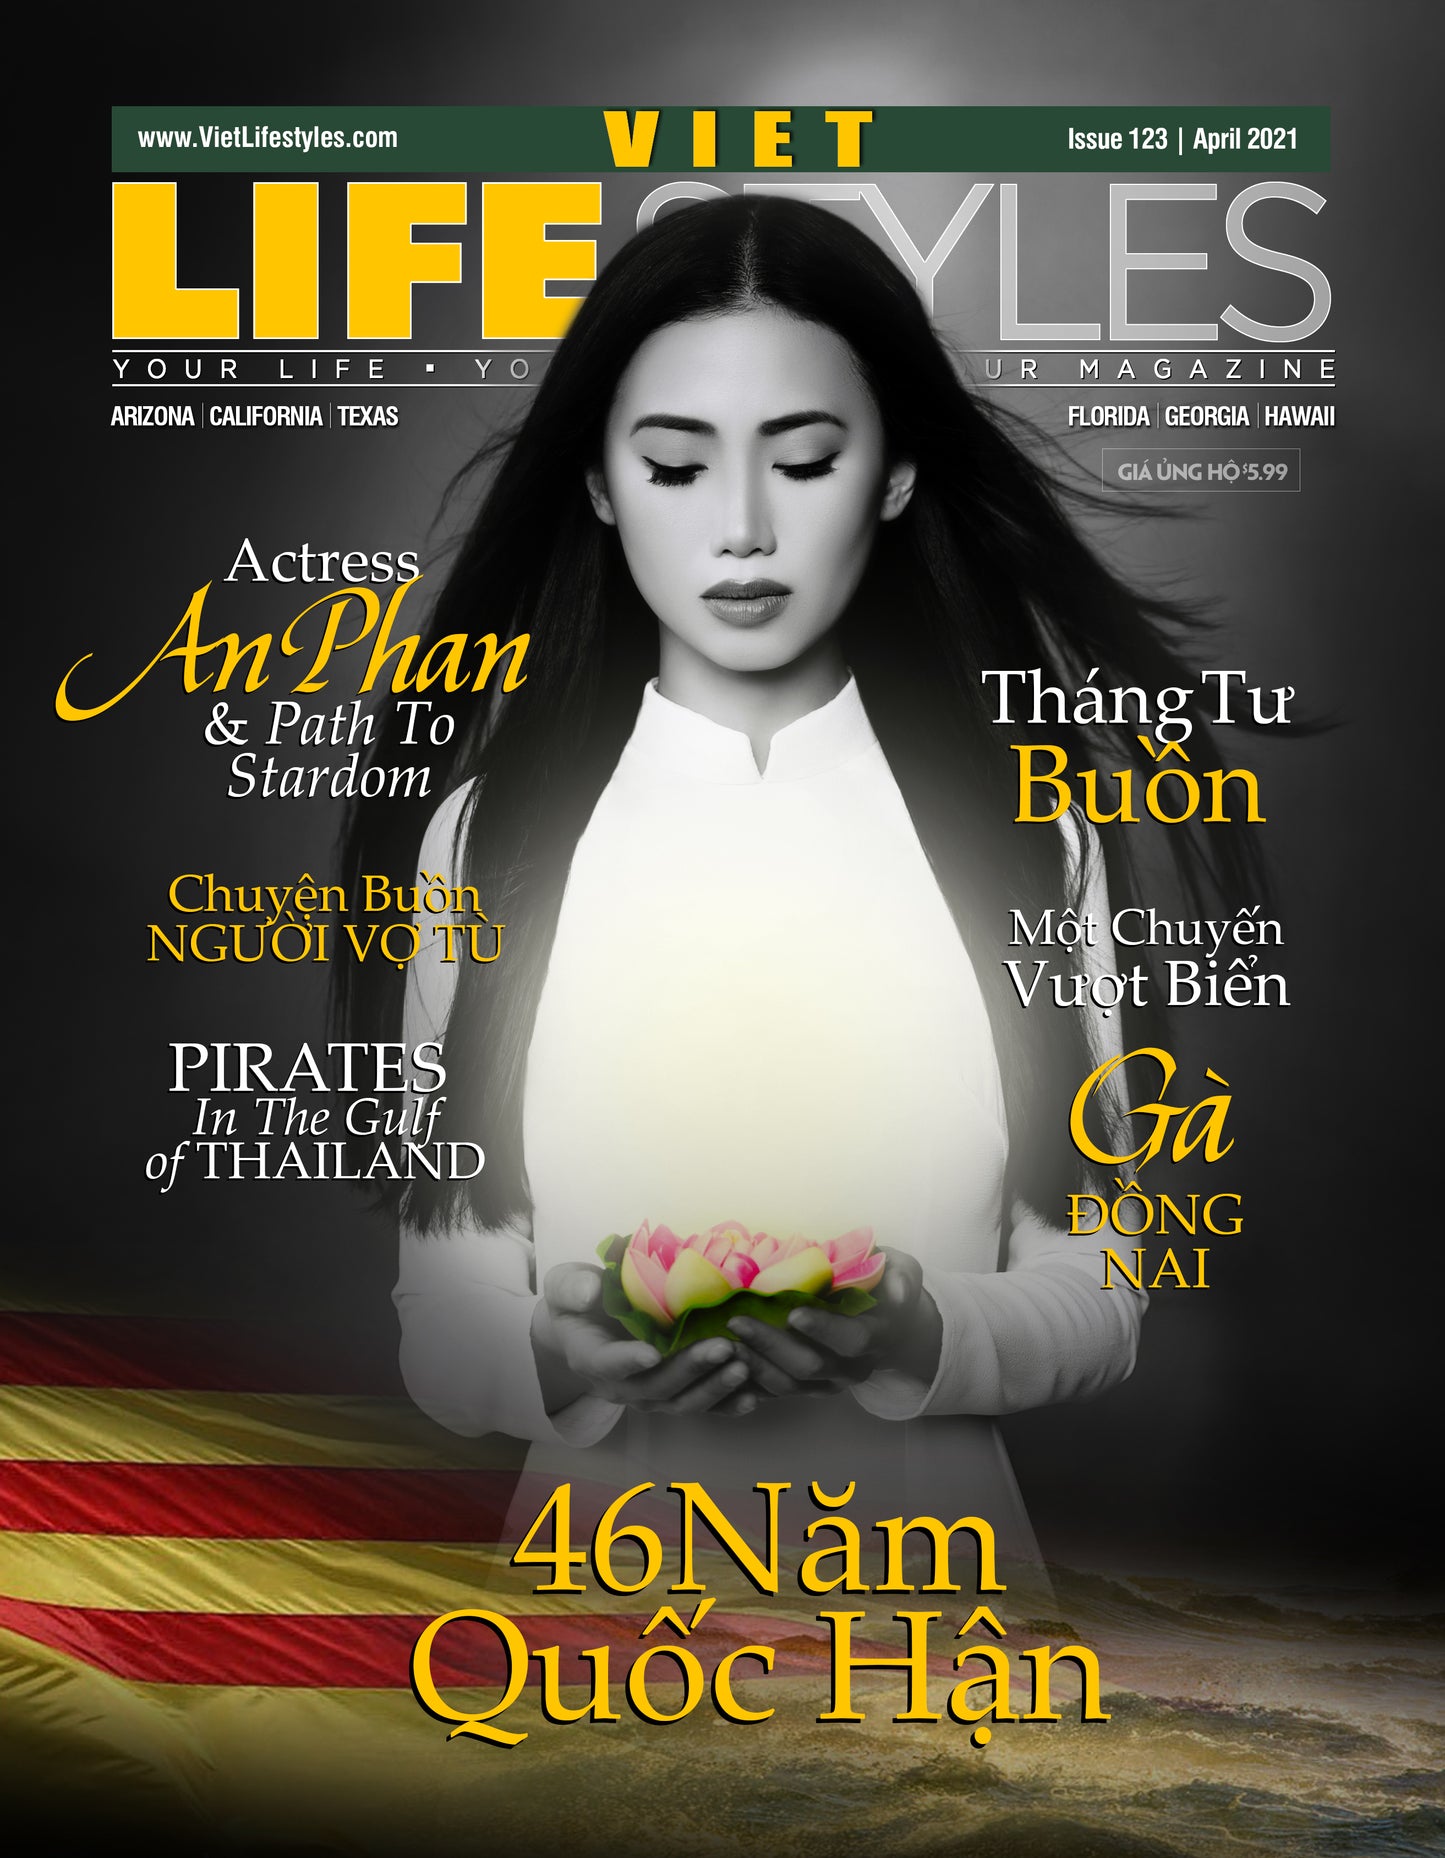 Vietlifestyles Issue 123 Featuring An Phan